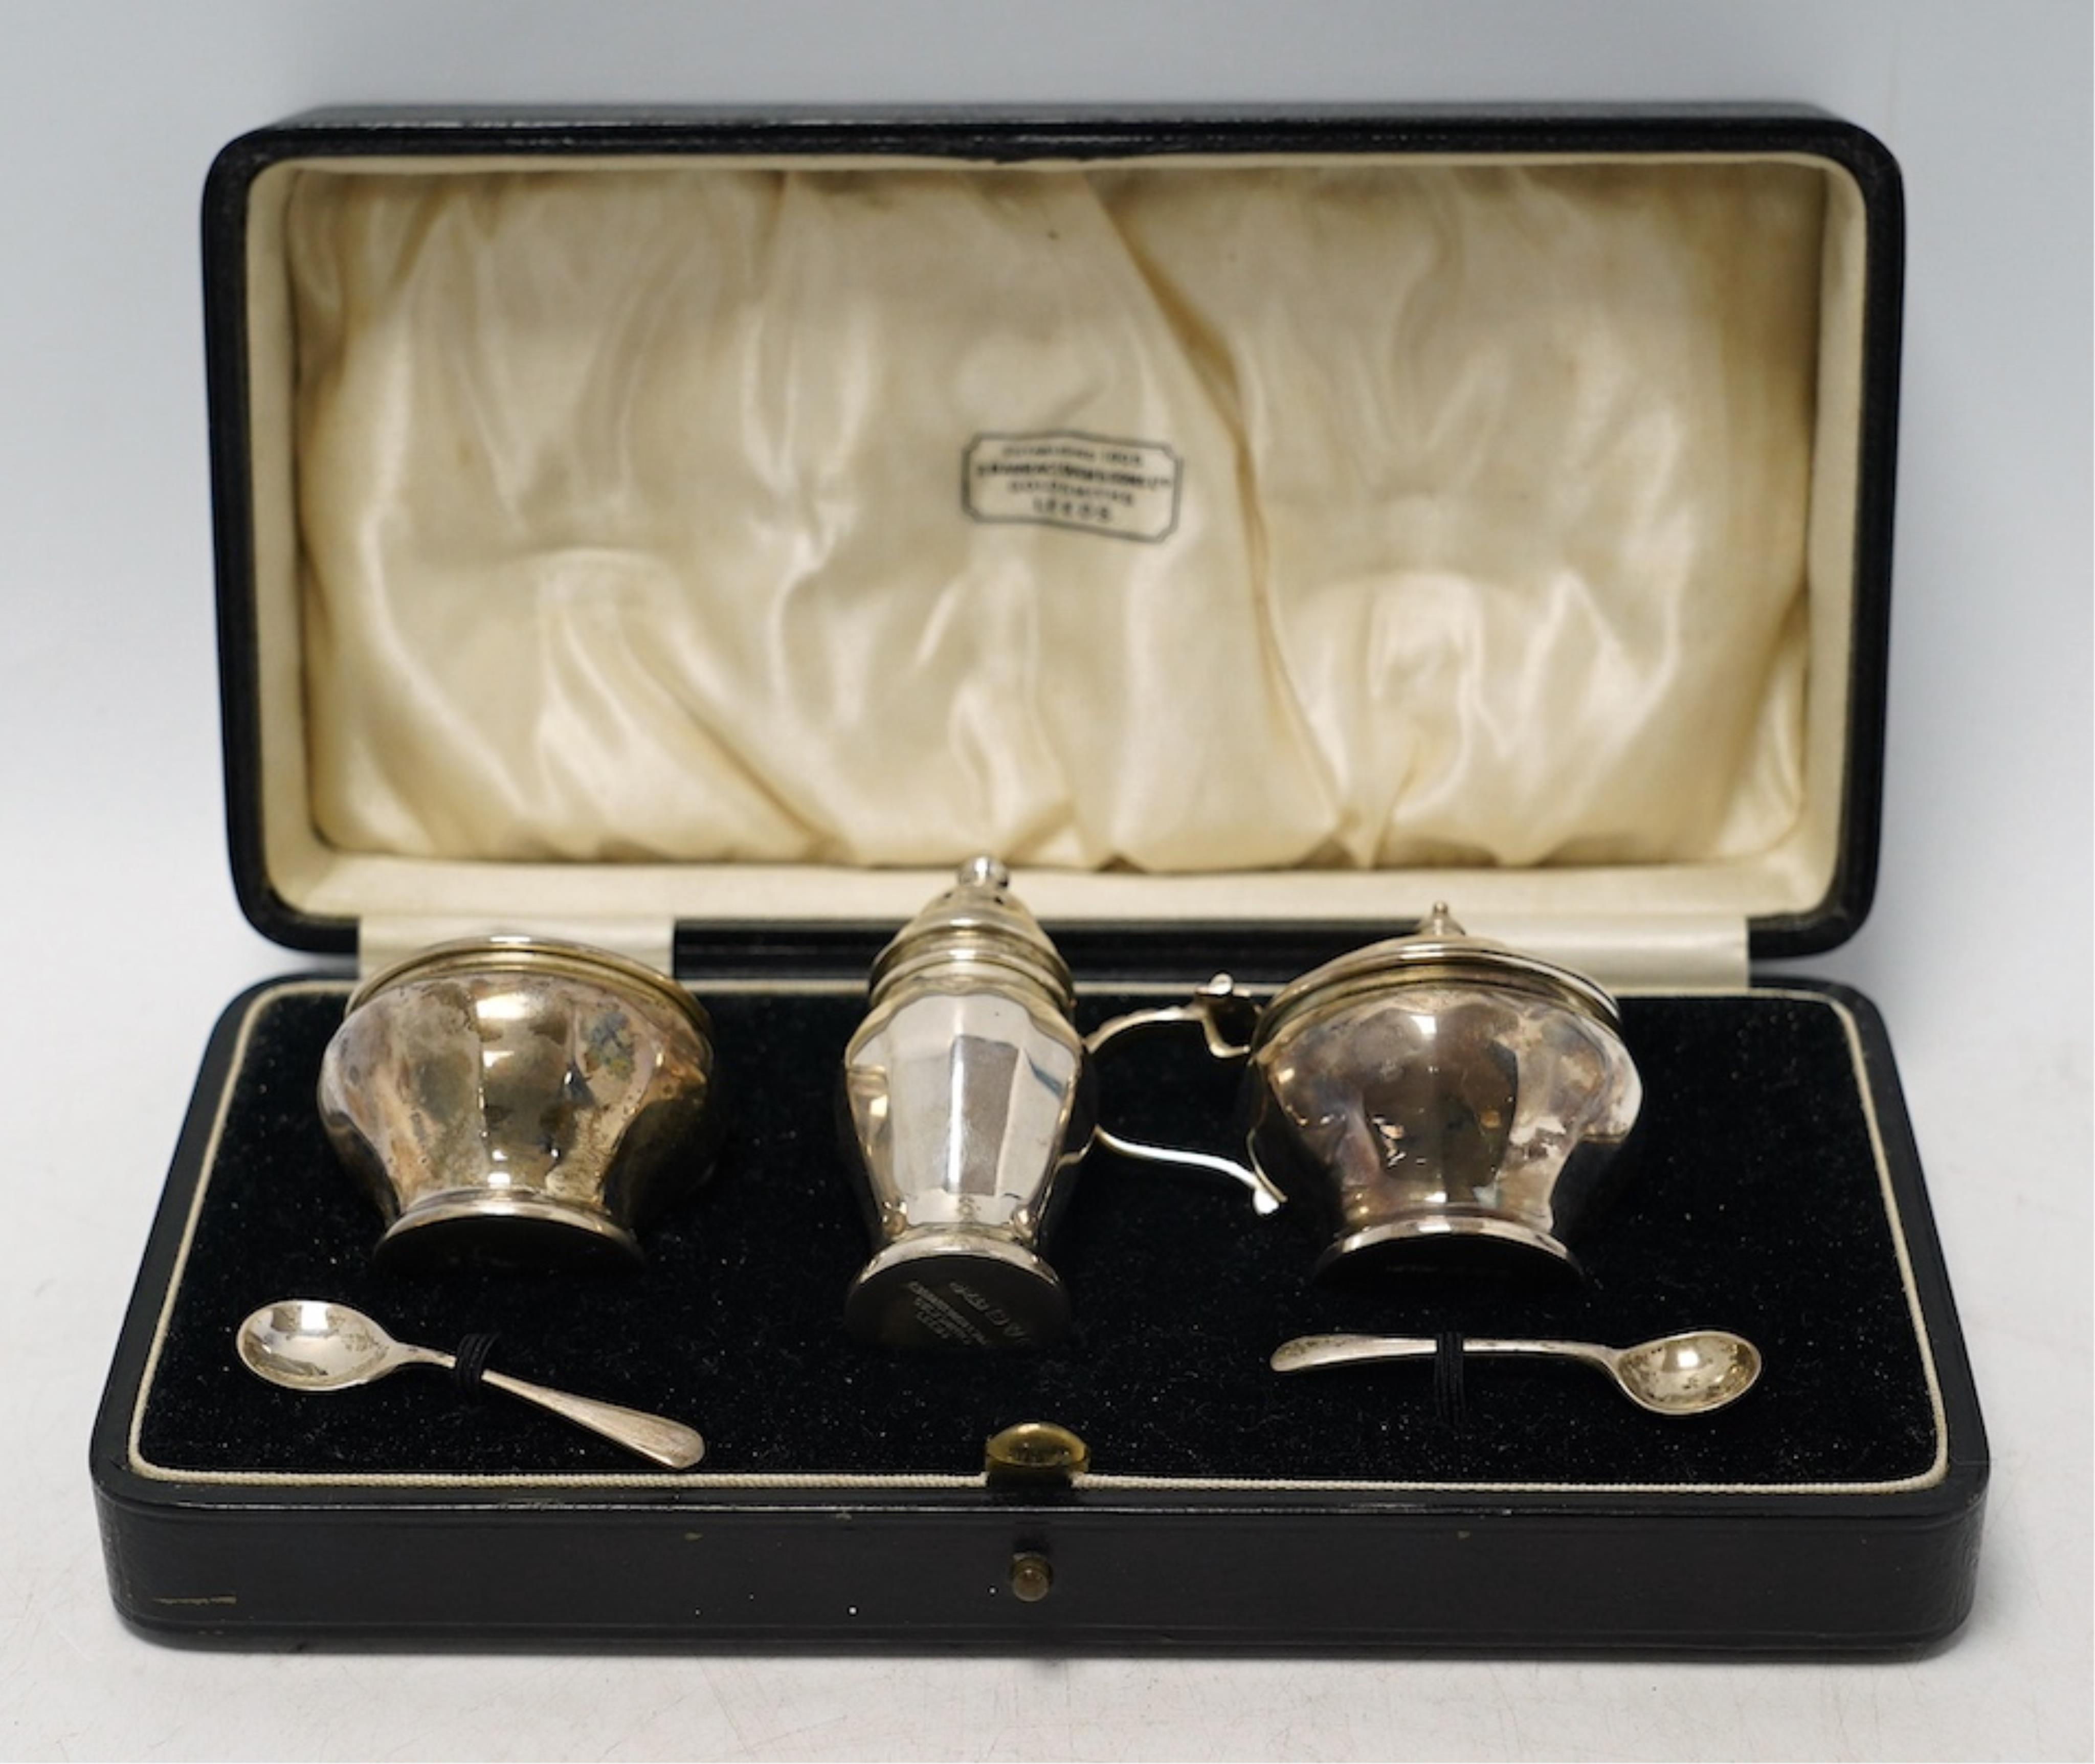 A cased George V silver three piece condiment set, Z. Barraclough & Sons, Chester, 1931, with two associated silver spoons. Condition - fair